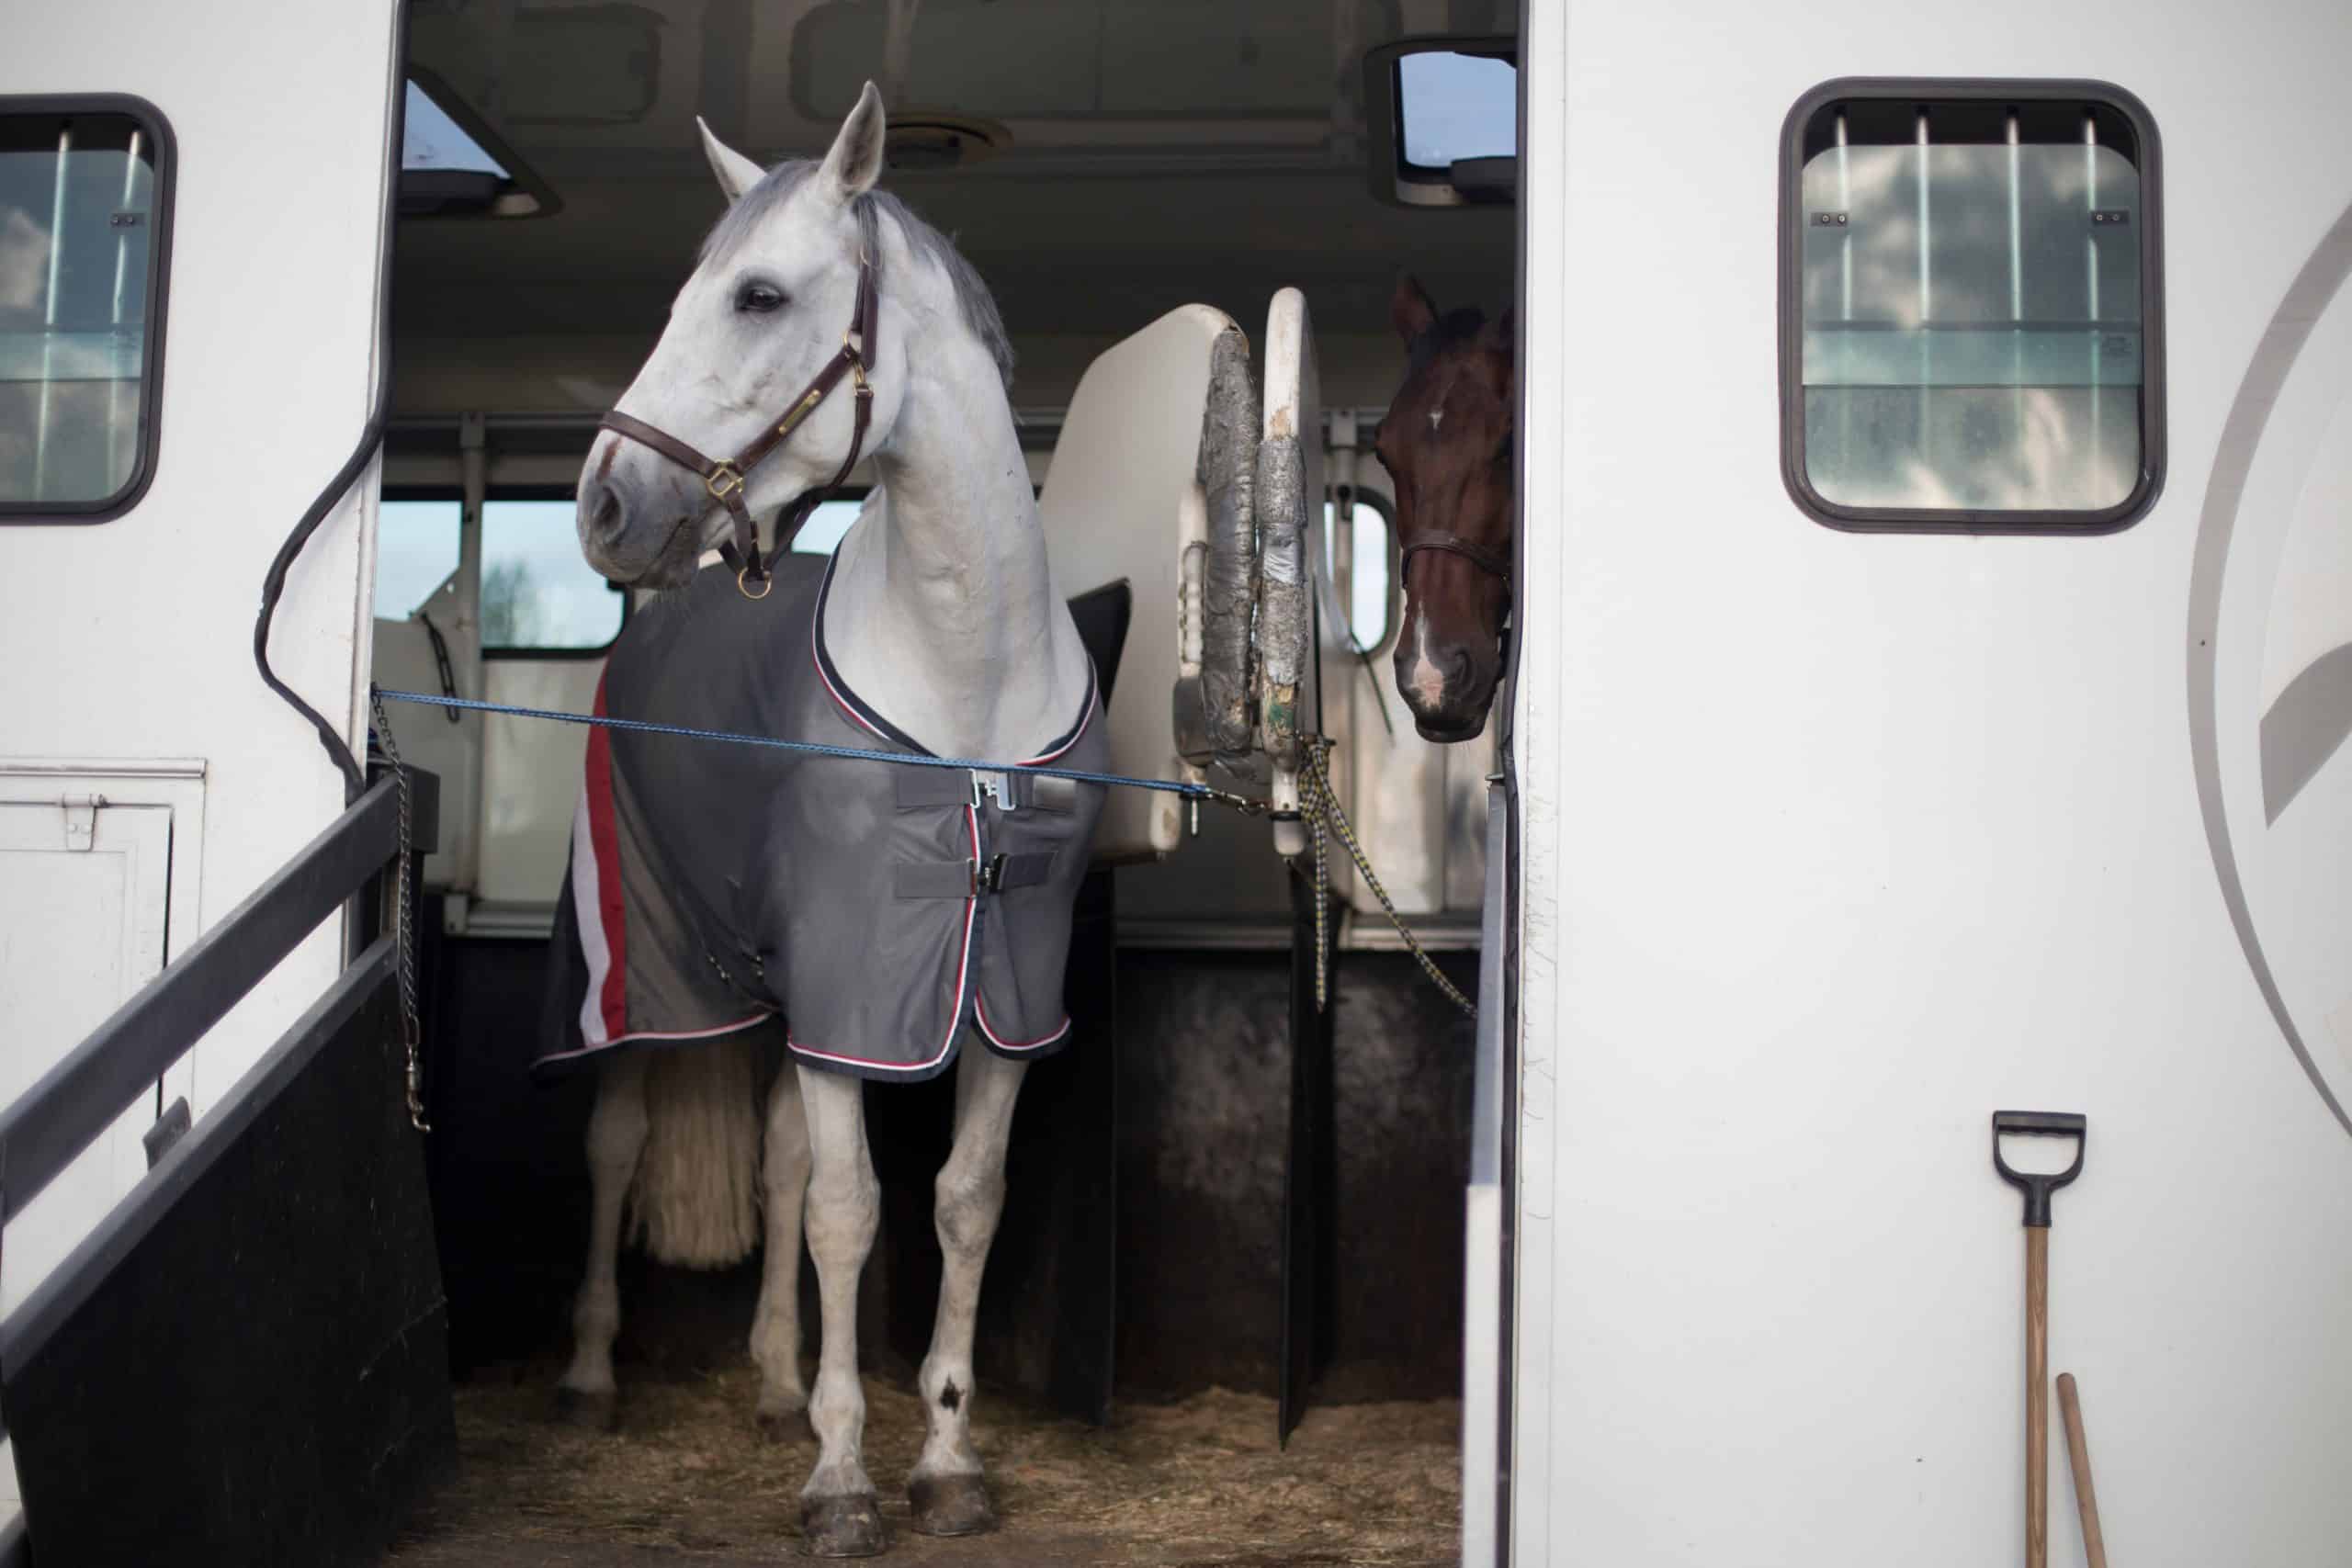 A horse is waiting with another horse inside a trailer